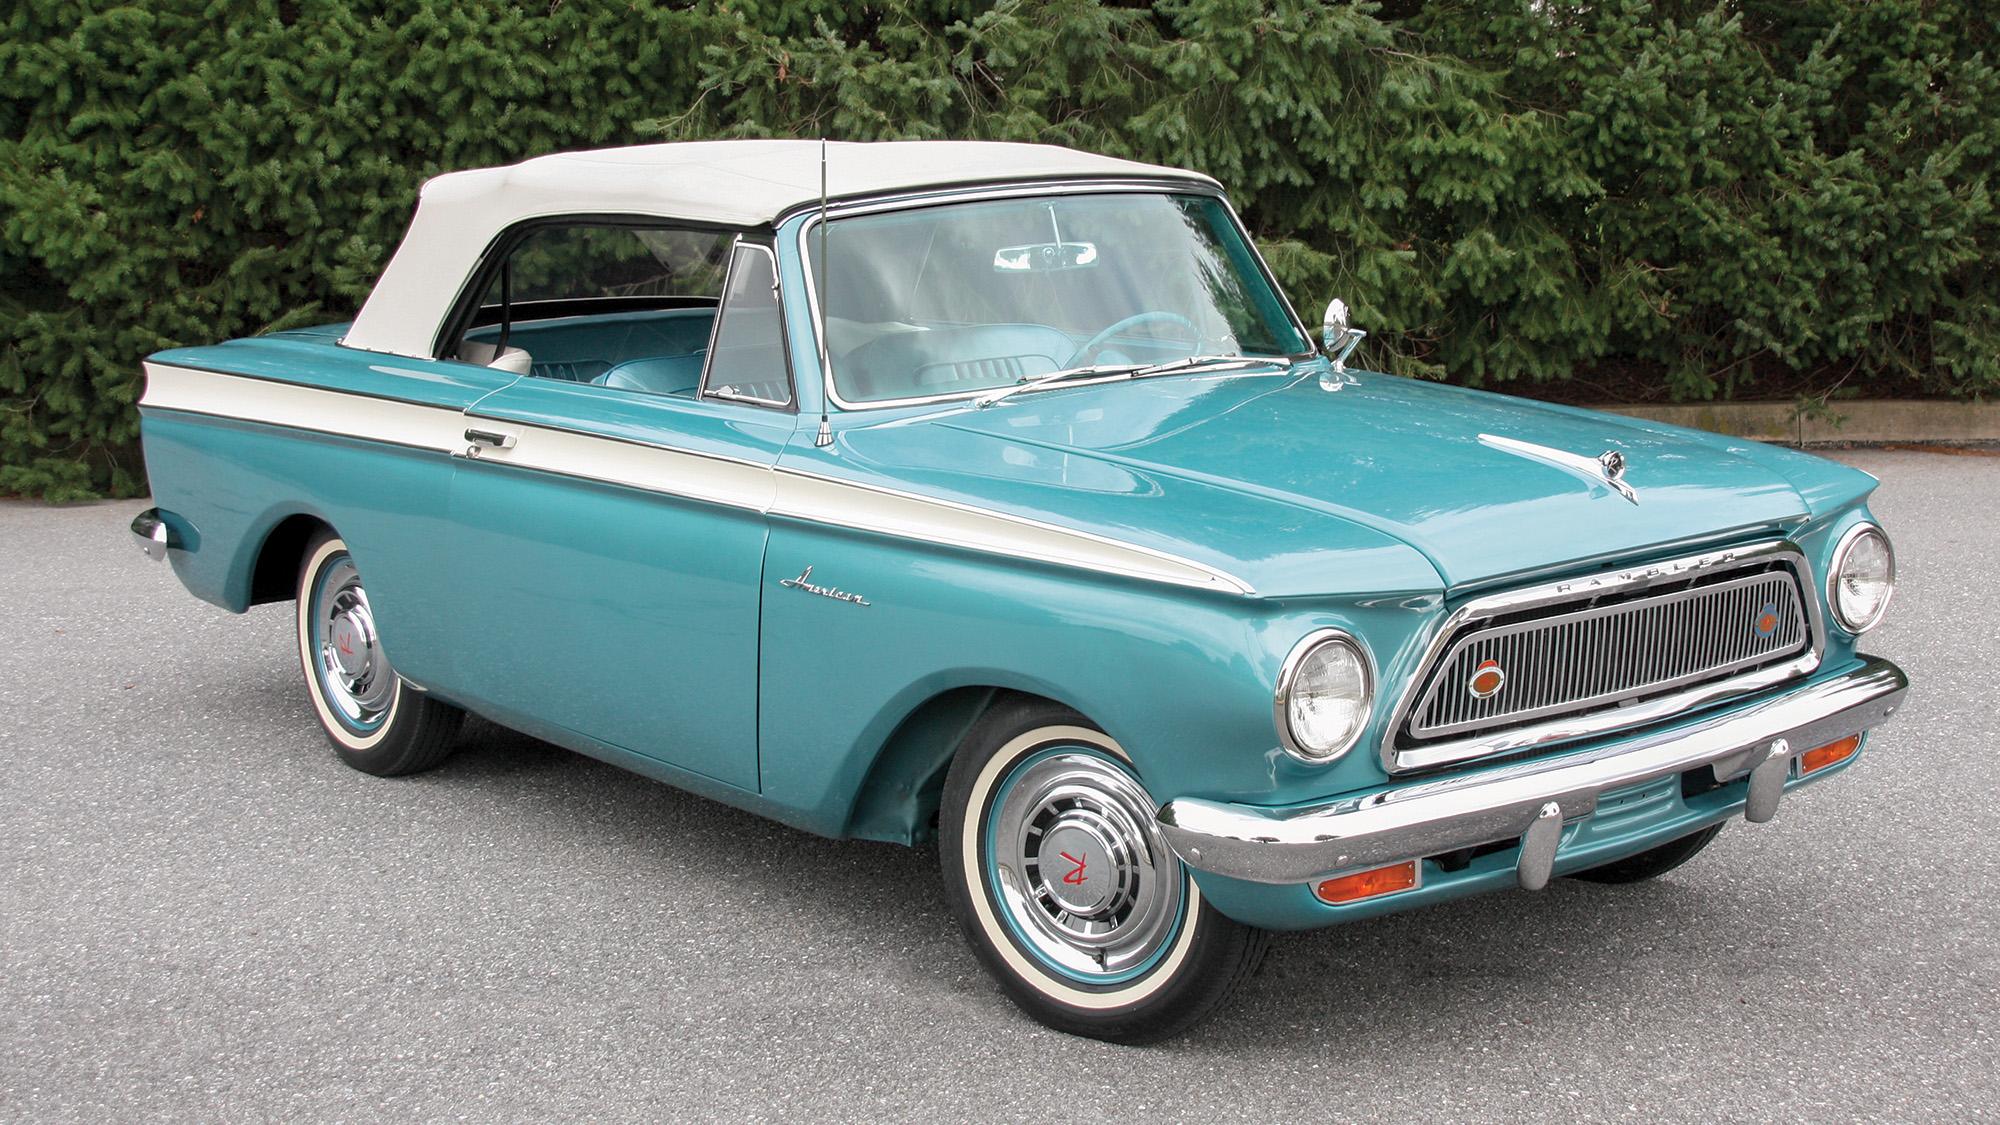 A restored 1963 American 440 is the ultimate iteration of America's first successful compact car